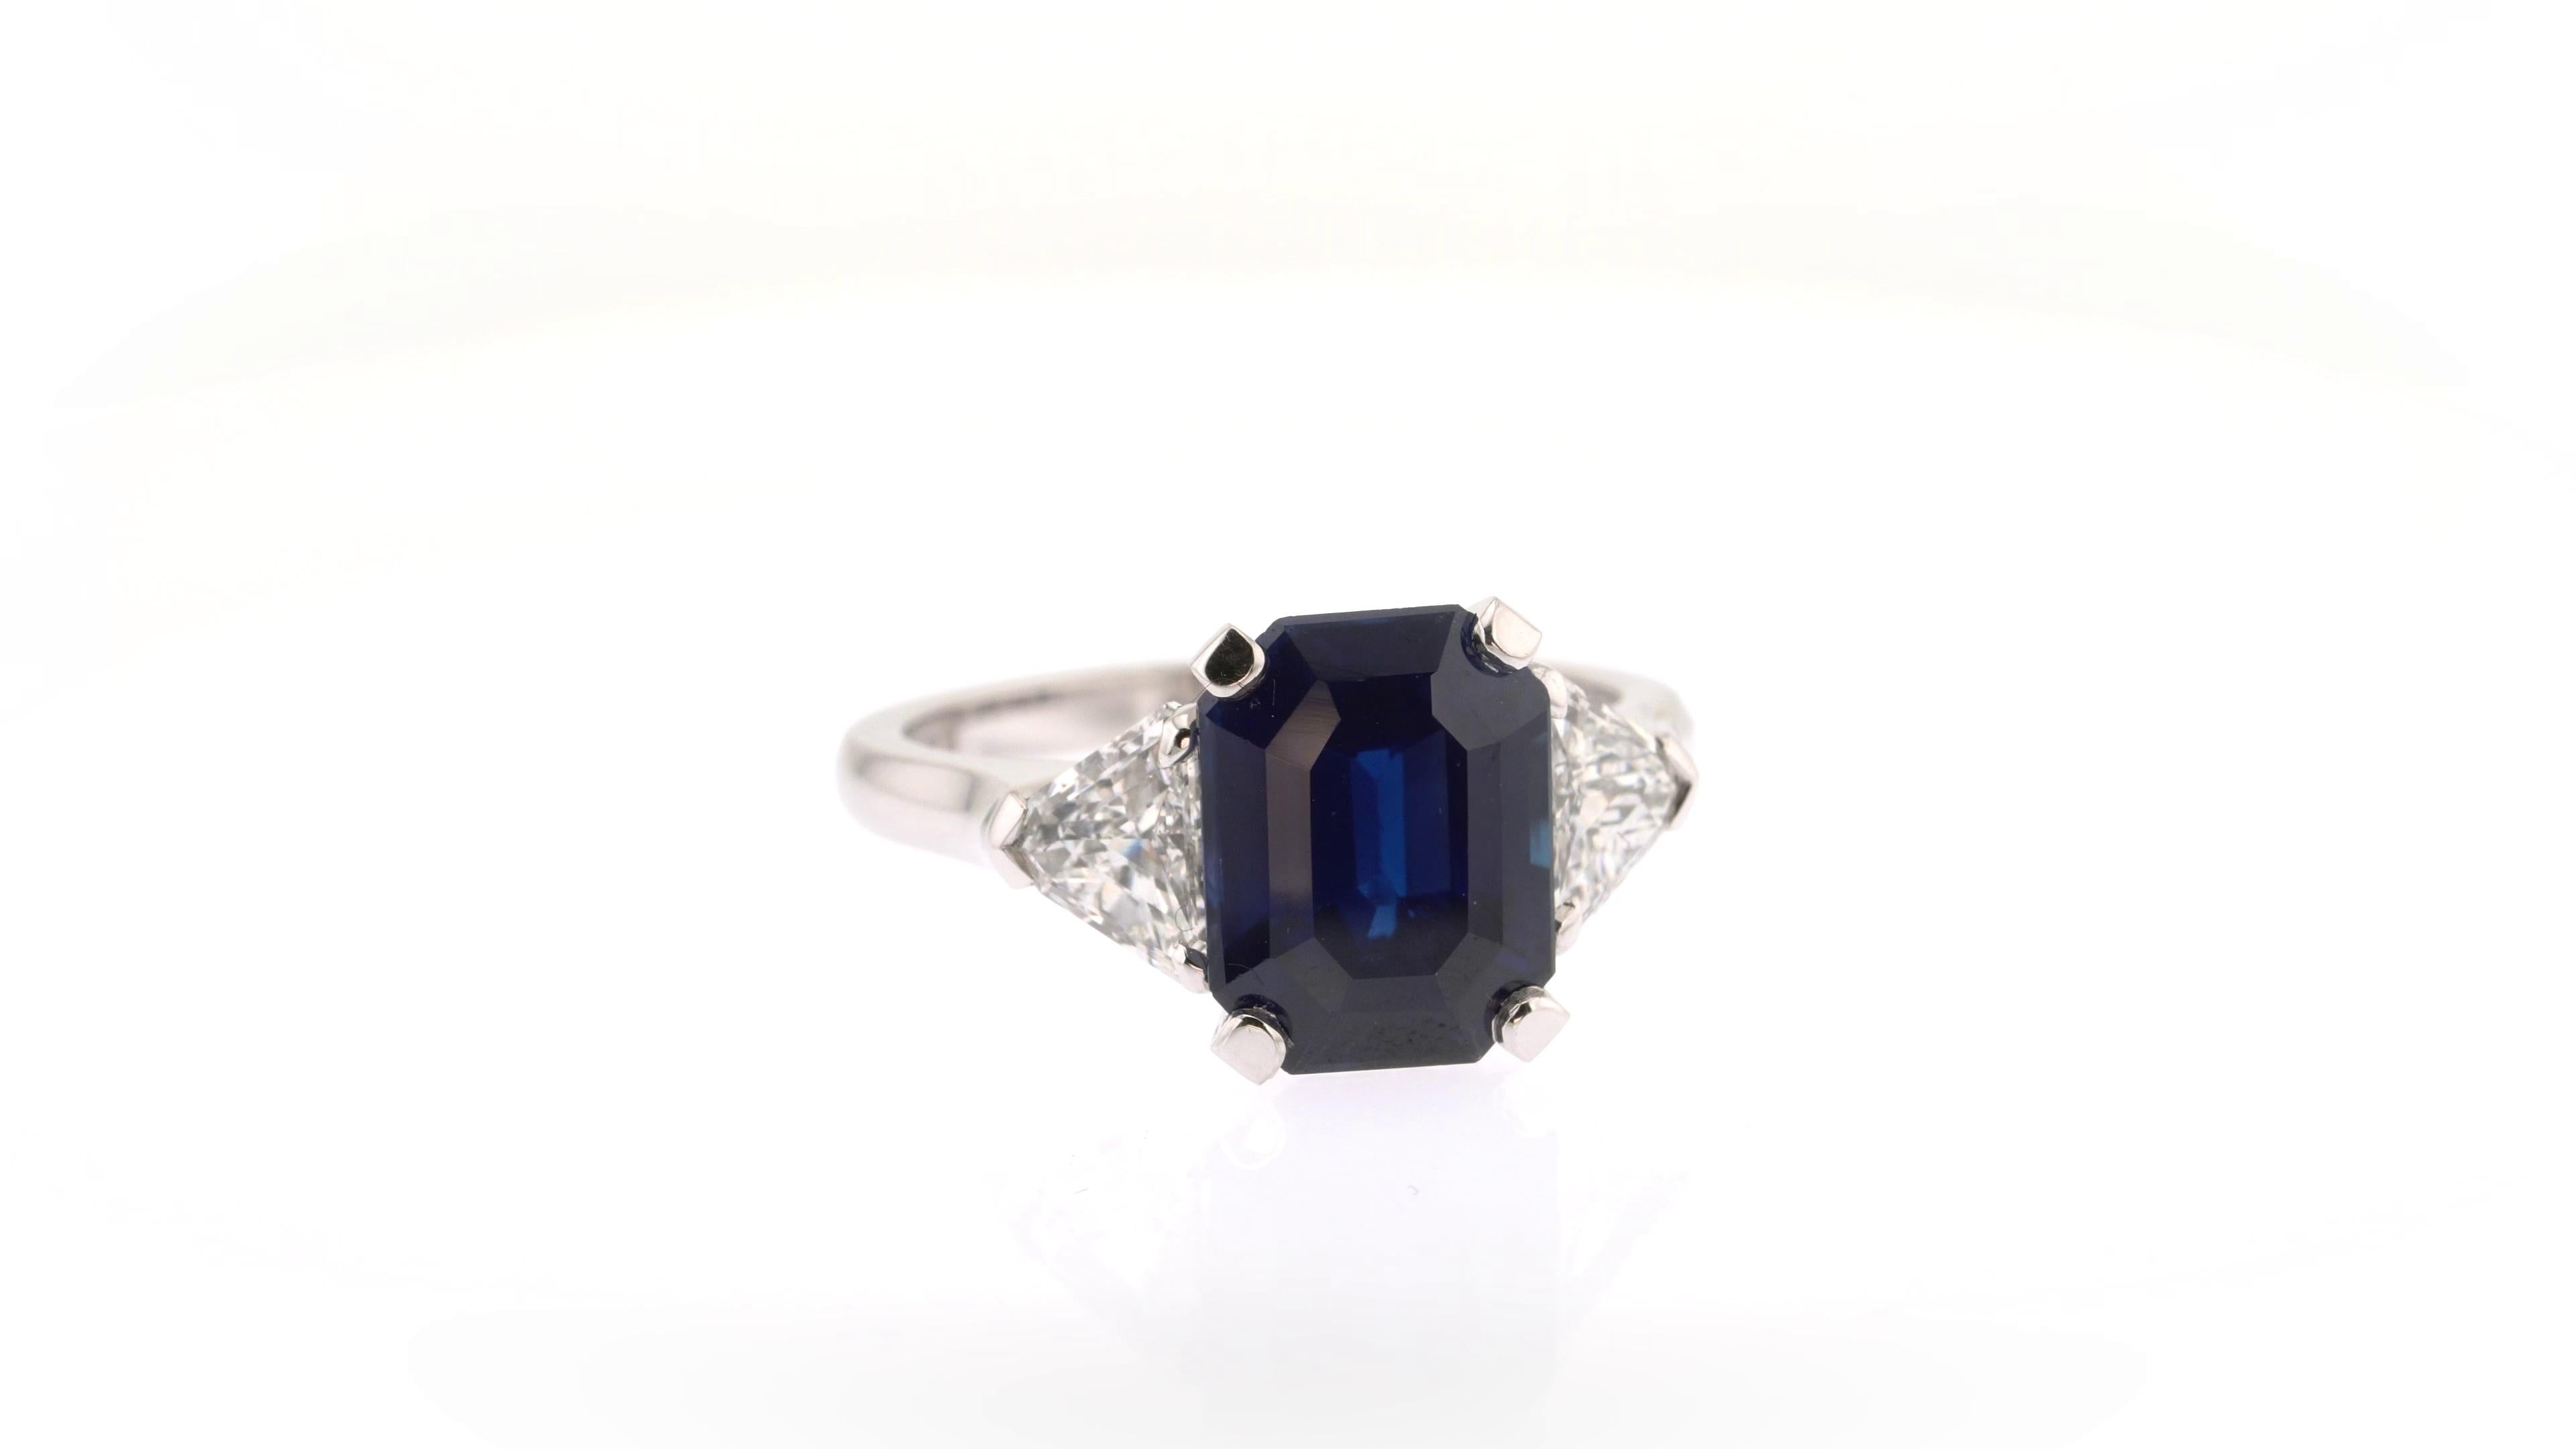 sapphire and diamond ring white gold